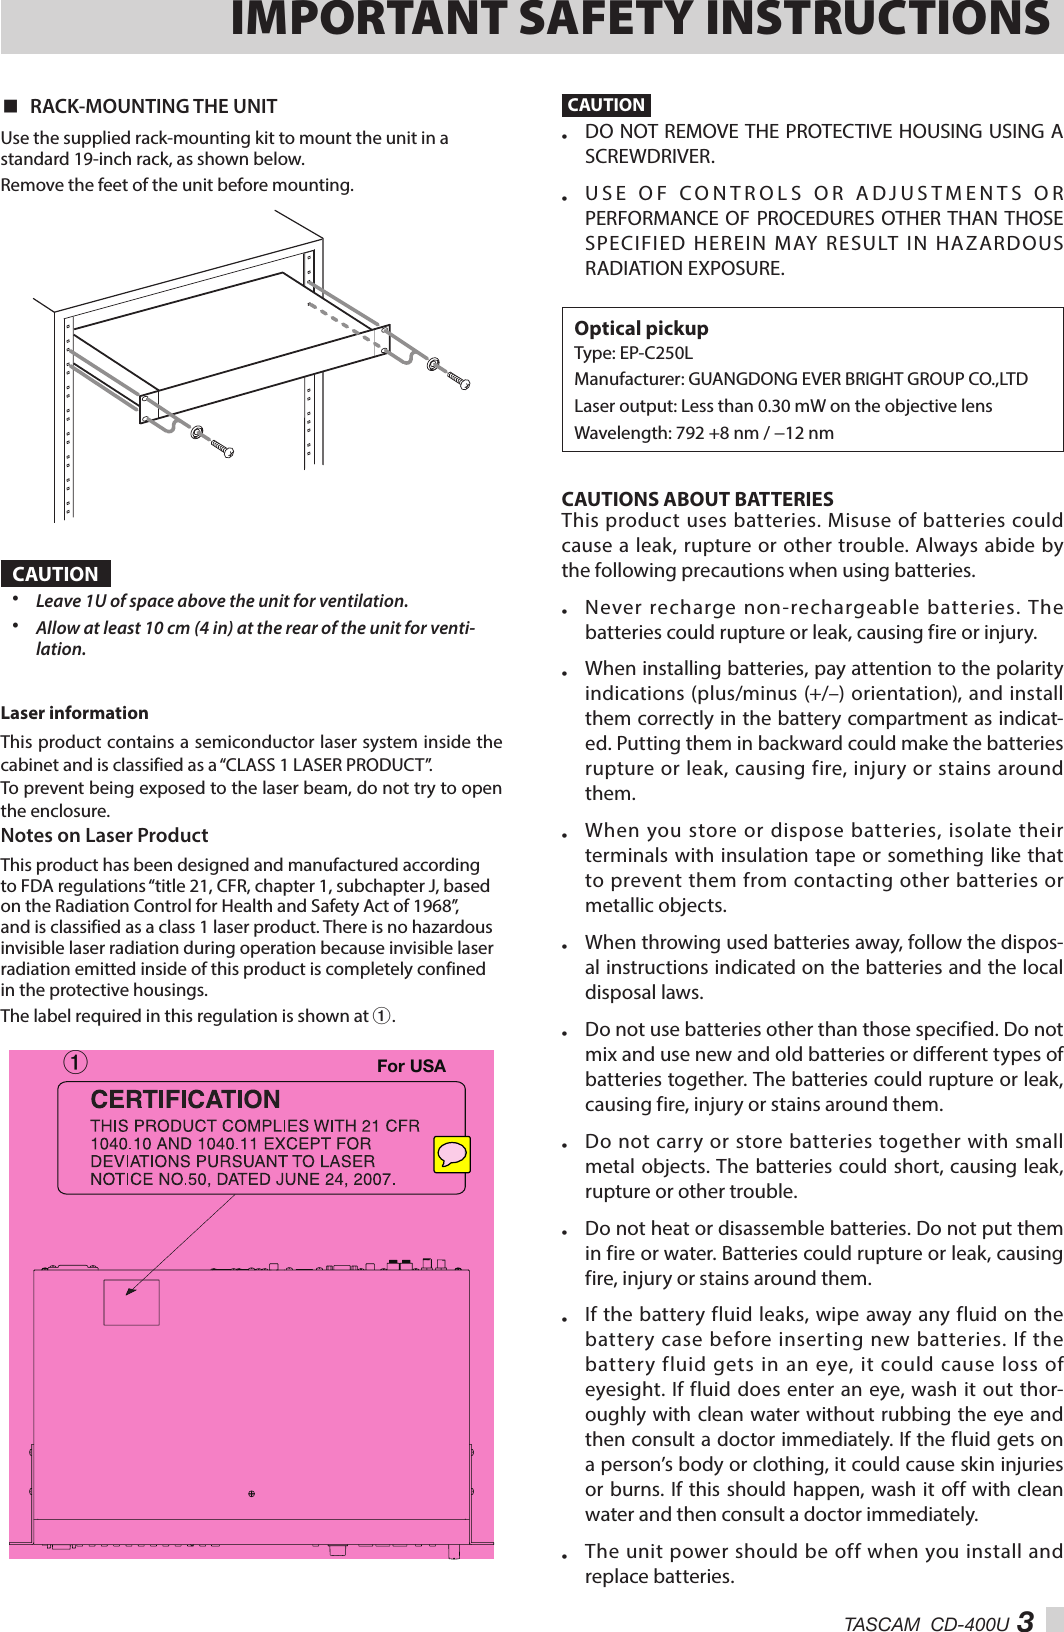 TASCAM  CD-400U 3IMPORTANT SAFETY INSTRUCTIONS 8RACK-MOUNTING THE UNITUse the supplied rack-mounting kit to mount the unit in a standard 19-inch rack, as shown below.Remove the feet of the unit before mounting.CAUTION•  Leave 1U of space above the unit for ventilation.•  Allow at least 10 cm (4 in) at the rear of the unit for venti-lation.Laser information This product contains a semiconductor laser system inside the cabinet and is classified as a “CLASS 1 LASER PRODUCT”. To prevent being exposed to the laser beam, do not try to open the enclosure. Notes on Laser ProductThis product has been designed and manufactured according to FDA regulations “title 21, CFR, chapter 1, subchapter J, based on the Radiation Control for Health and Safety Act of 1968”, and is classified as a class 1 laser product. There is no hazardous invisible laser radiation during operation because invisible laser radiation emitted inside of this product is completely confined in the protective housings.The label required in this regulation is shown at 1.1For USACAUTION•  DO NOT REMOVE THE PROTECTIVE HOUSING USING A SCREWDRIVER.•  USE OF CONTROLS OR ADJUSTMENTS OR PERFORMANCE OF PROCEDURES OTHER THAN THOSE SPECIFIED HEREIN MAY RESULT IN HAZARDOUS RADIATION EXPOSURE.Optical pickupType: EP-C250LManufacturer: GUANGDONG EVER BRIGHT GROUP CO.,LTDLaser output:  Less than 0.30 mW on the objective lensWavelength:  792 +8 nm / −12 nmCAUTIONS ABOUT BATTERIESThis product uses batteries. Misuse of batteries could cause a leak, rupture or other trouble. Always abide by the following precautions when using batteries.•  Never recharge non-rechargeable batteries. The batteries could rupture or leak, causing fire or injury.•  When installing batteries, pay attention to the polarity indications (plus/minus (+/–) orientation), and install them correctly in the battery compartment as indicat-ed. Putting them in backward could make the batteries rupture or leak, causing fire, injury or stains around them. •  When you store or dispose batteries, isolate their terminals with insulation tape or something like that to prevent them from contacting other batteries or metallic objects.•  When throwing used batteries away, follow the dispos-al instructions indicated on the batteries and the local disposal laws. •  Do not use batteries other than those specified. Do not mix and use new and old batteries or different types of batteries together. The batteries could rupture or leak, causing fire, injury or stains around them.•  Do not carry or store batteries together with small metal objects. The batteries could short, causing leak, rupture or other trouble.•  Do not heat or disassemble batteries. Do not put them in fire or water. Batteries could rupture or leak, causing fire, injury or stains around them.•  If the battery fluid leaks, wipe away any fluid on the battery case before inserting new batteries. If the battery fluid gets in an eye, it could cause loss of eyesight. If fluid does enter an eye, wash it out thor-oughly with clean water without rubbing the eye and then consult a doctor immediately. If the fluid gets on a person’s body or clothing, it could cause skin injuries or burns. If this should happen, wash it off with clean water and then consult a doctor immediately. •  The unit power should be off when you install and replace batteries. 